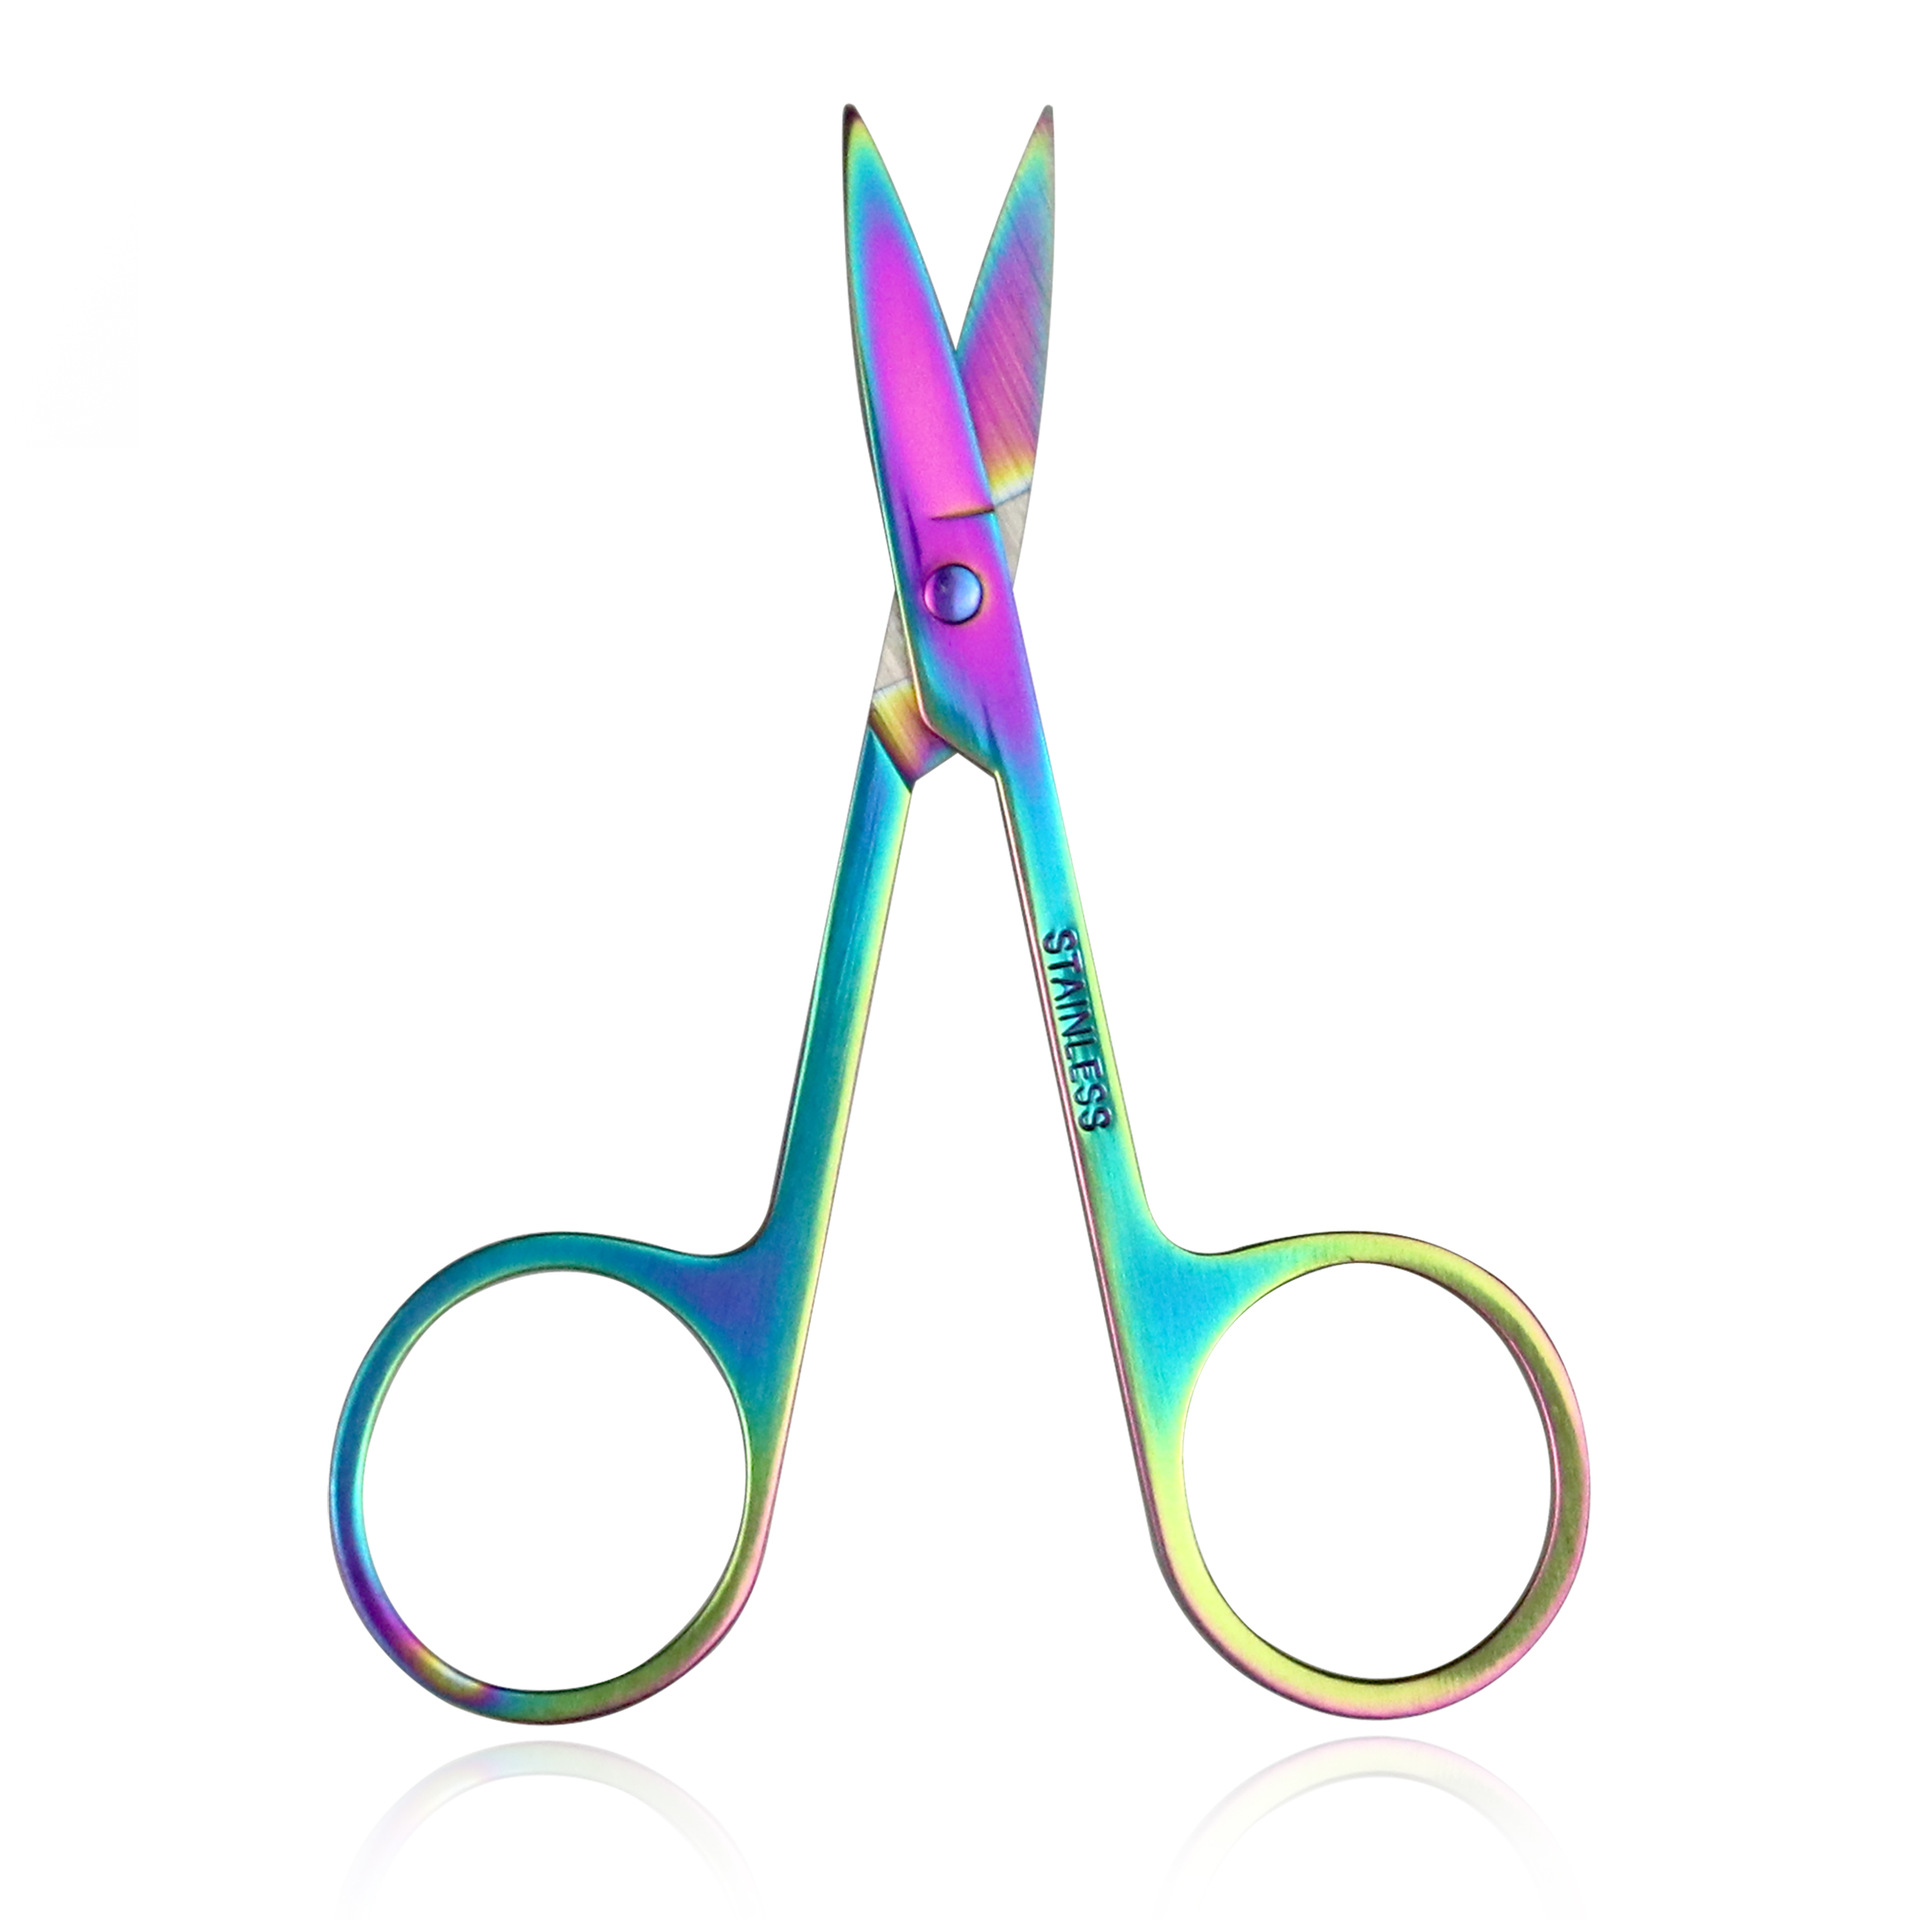 Stainless Steel Crane Scissors Eyebrow Trimming Scissors Electroplating  Colorful Small Scissors